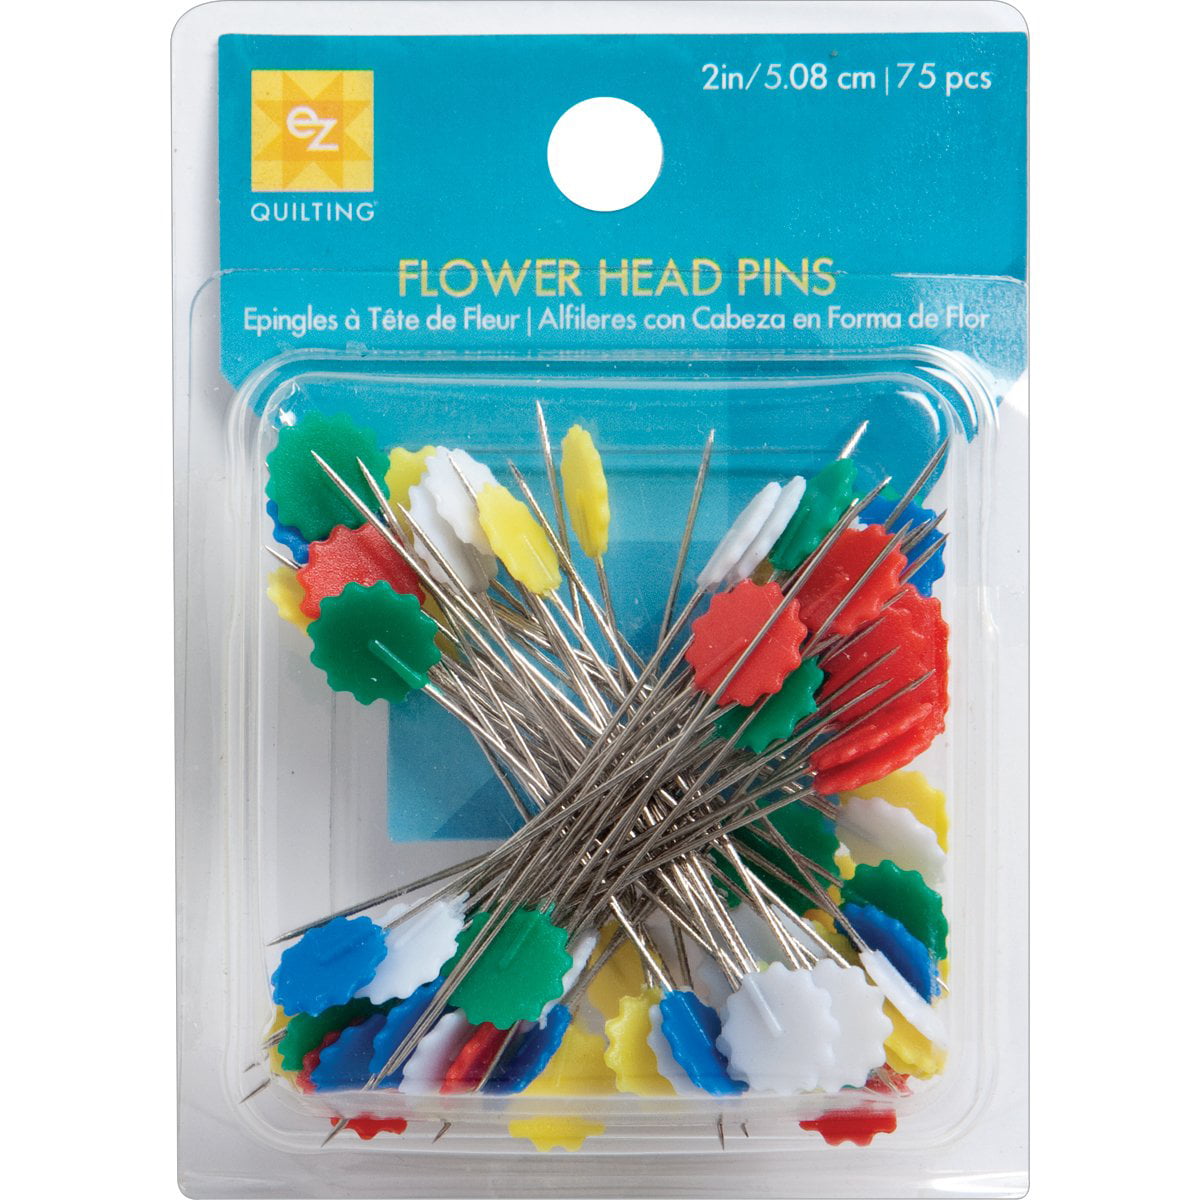 MUCHEN SHOP Flower Head Pins,100 Pieces Colorful Patchwork Pins DIY Sewing Straight Needles Quilting Tool for Dressmaking Decorating Crafting Marking Butterfly Shape Plasitic Boxed